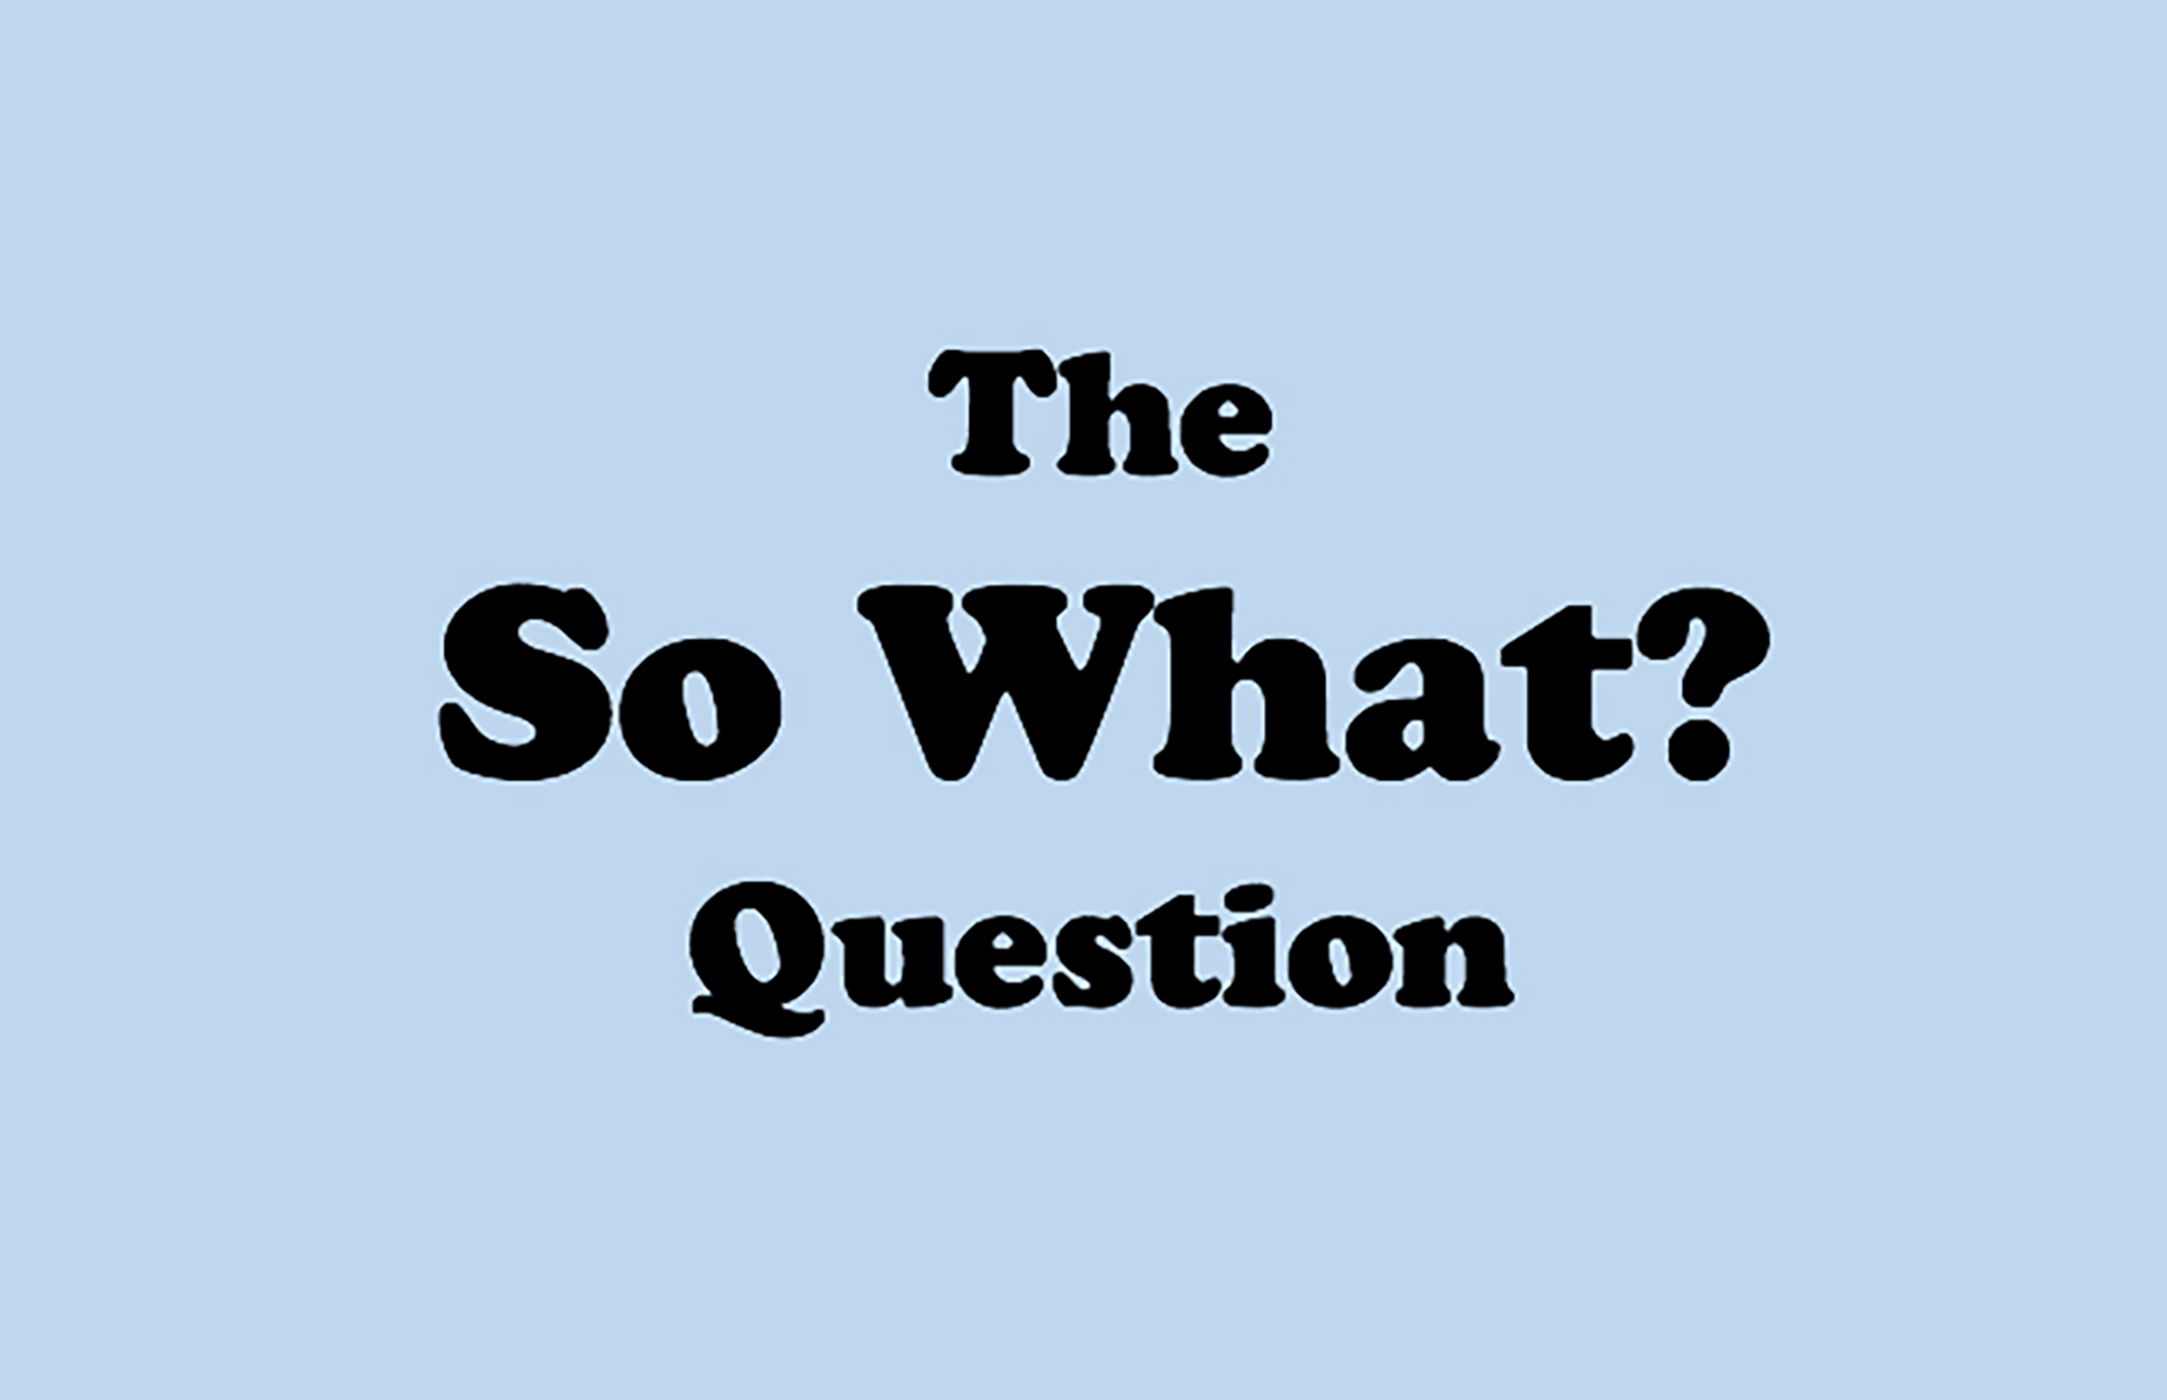 The So What? Question